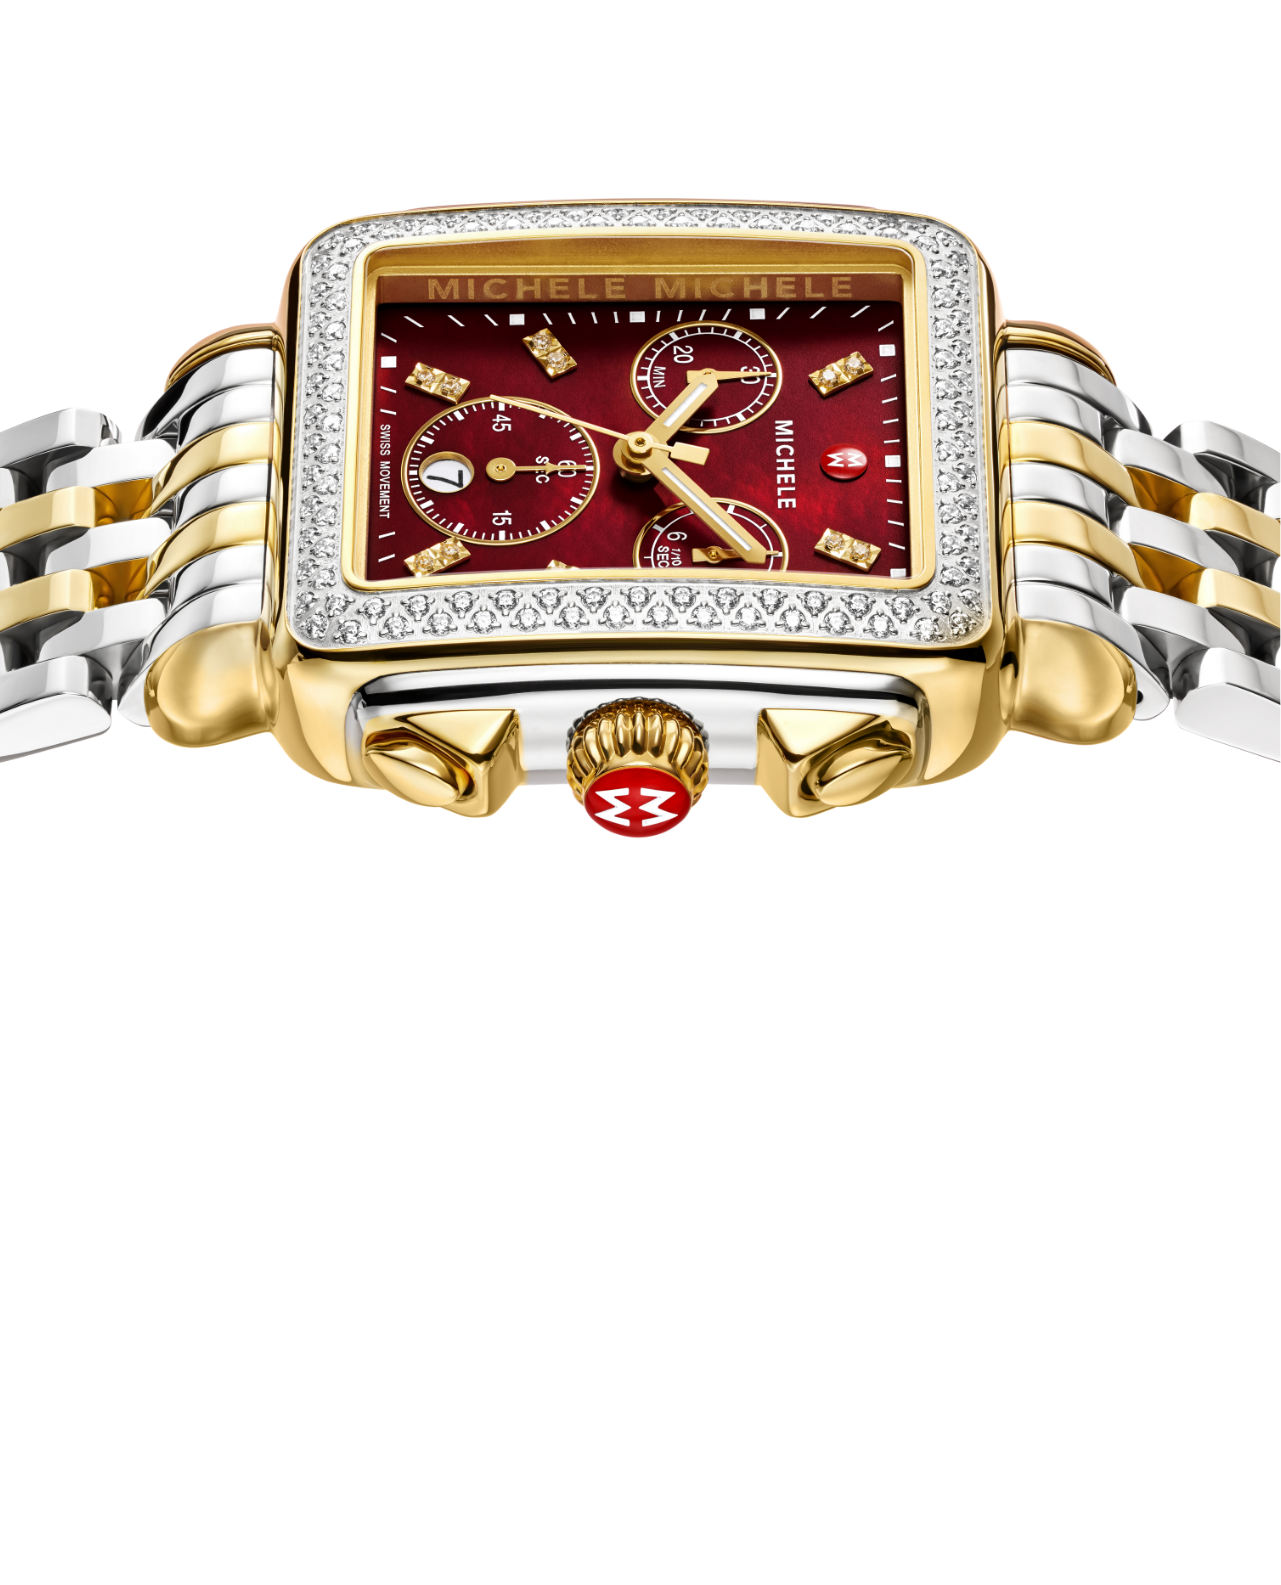 Close up shot of MICHELE Deco watch with a ruby red dial